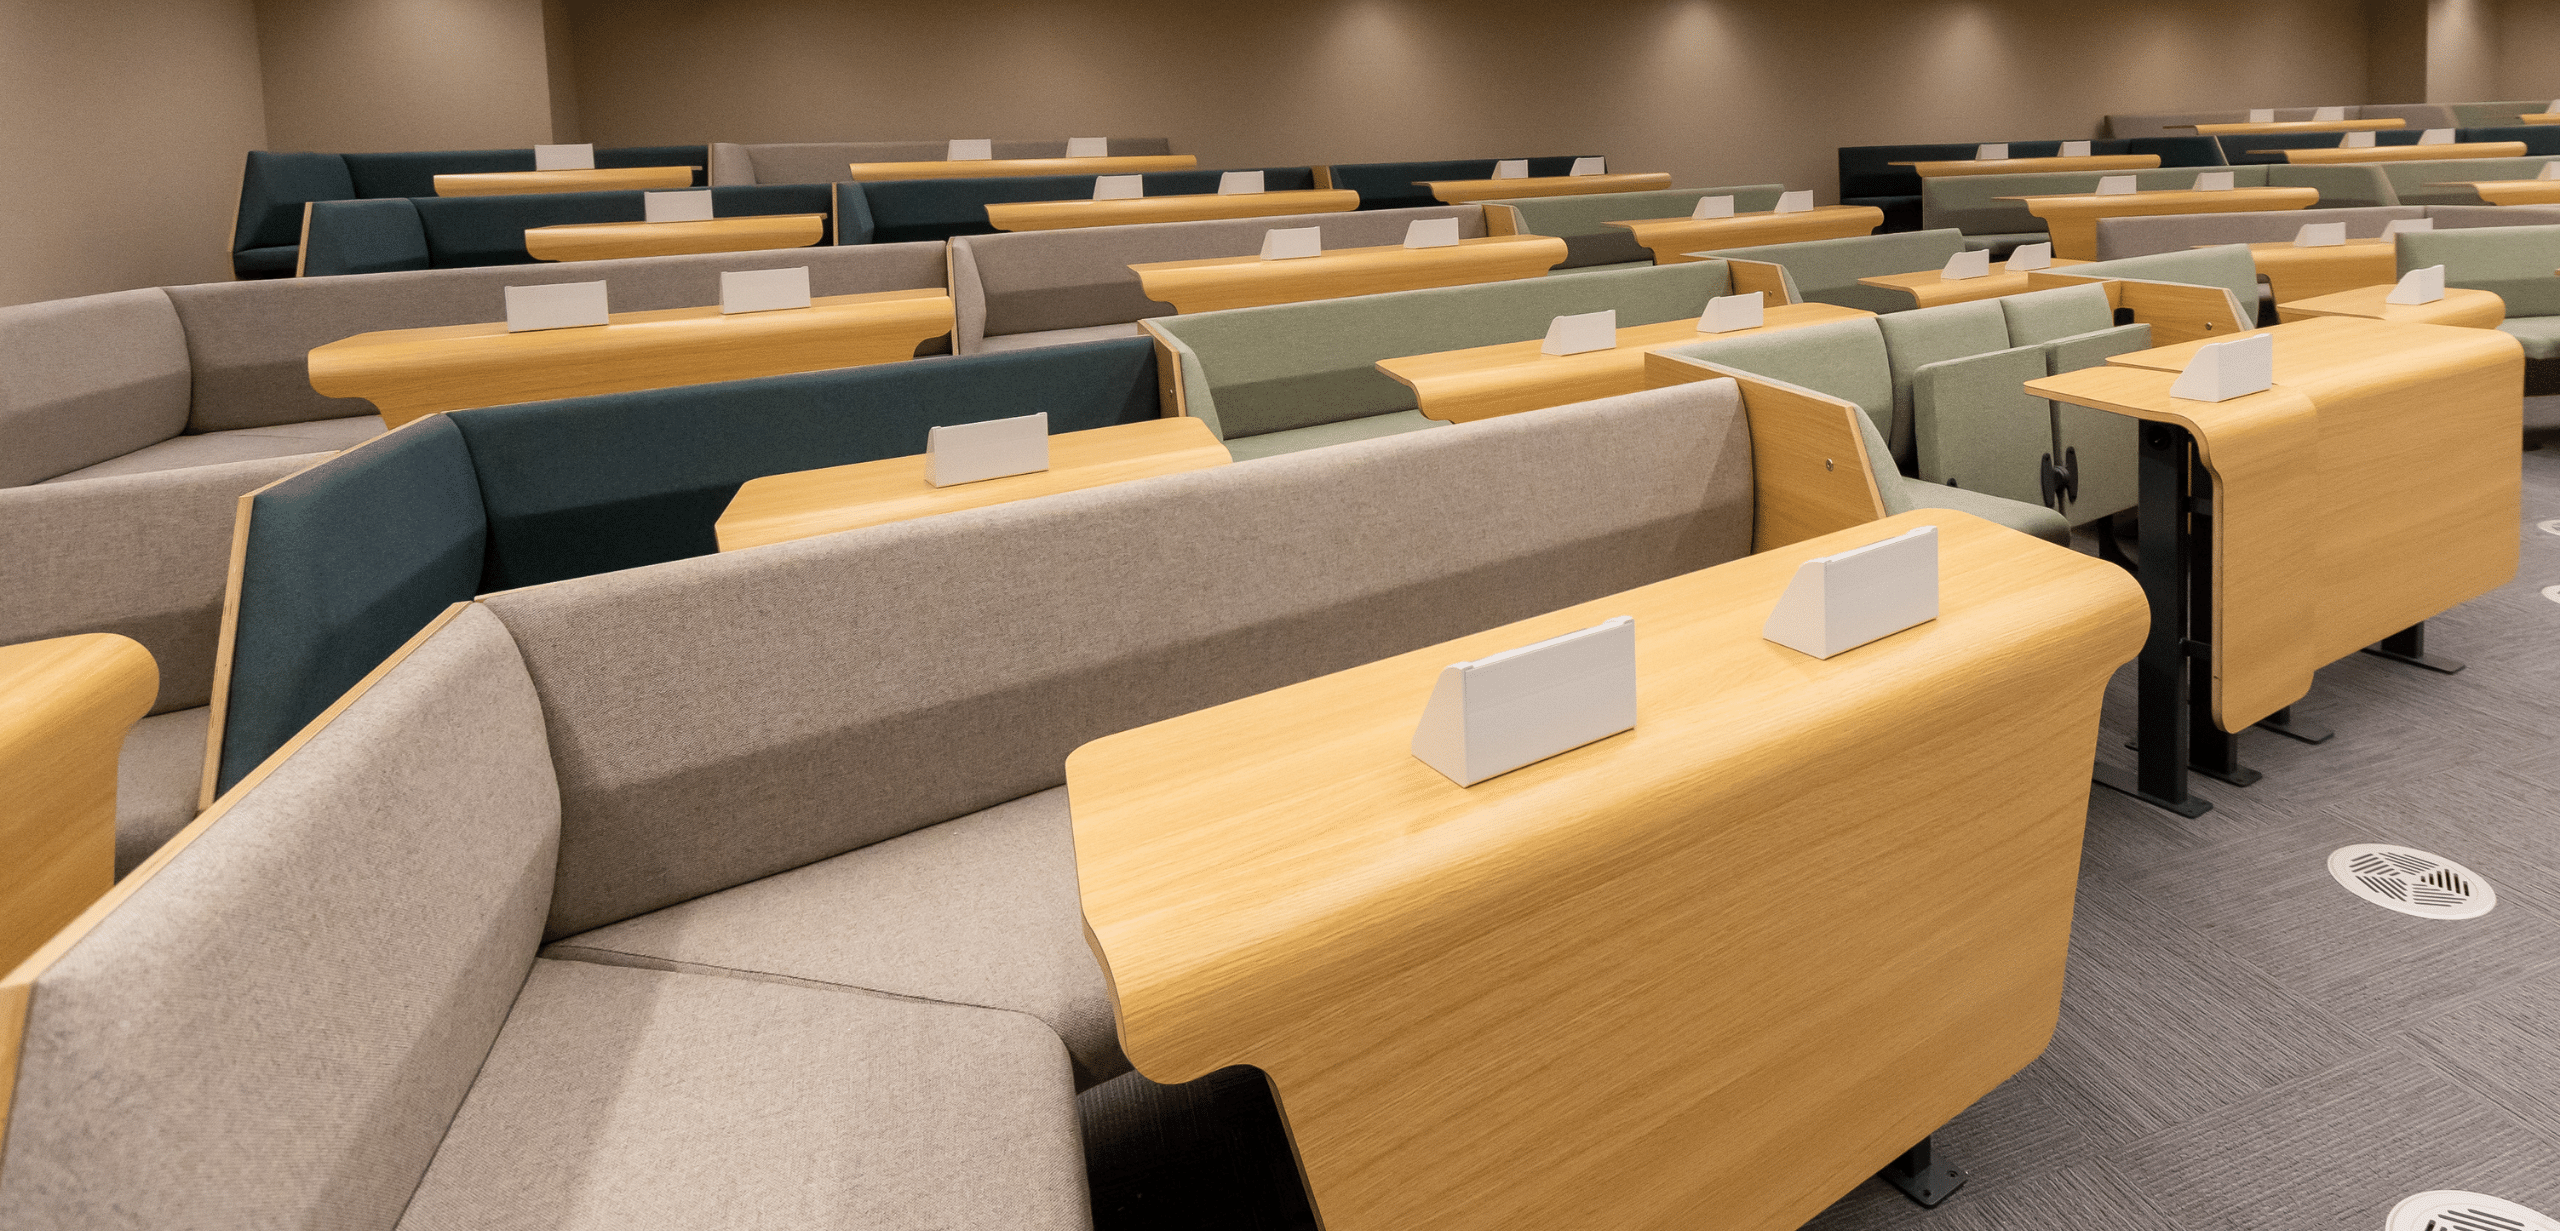 A lecture hall with grey lecture hall seating and green walls.